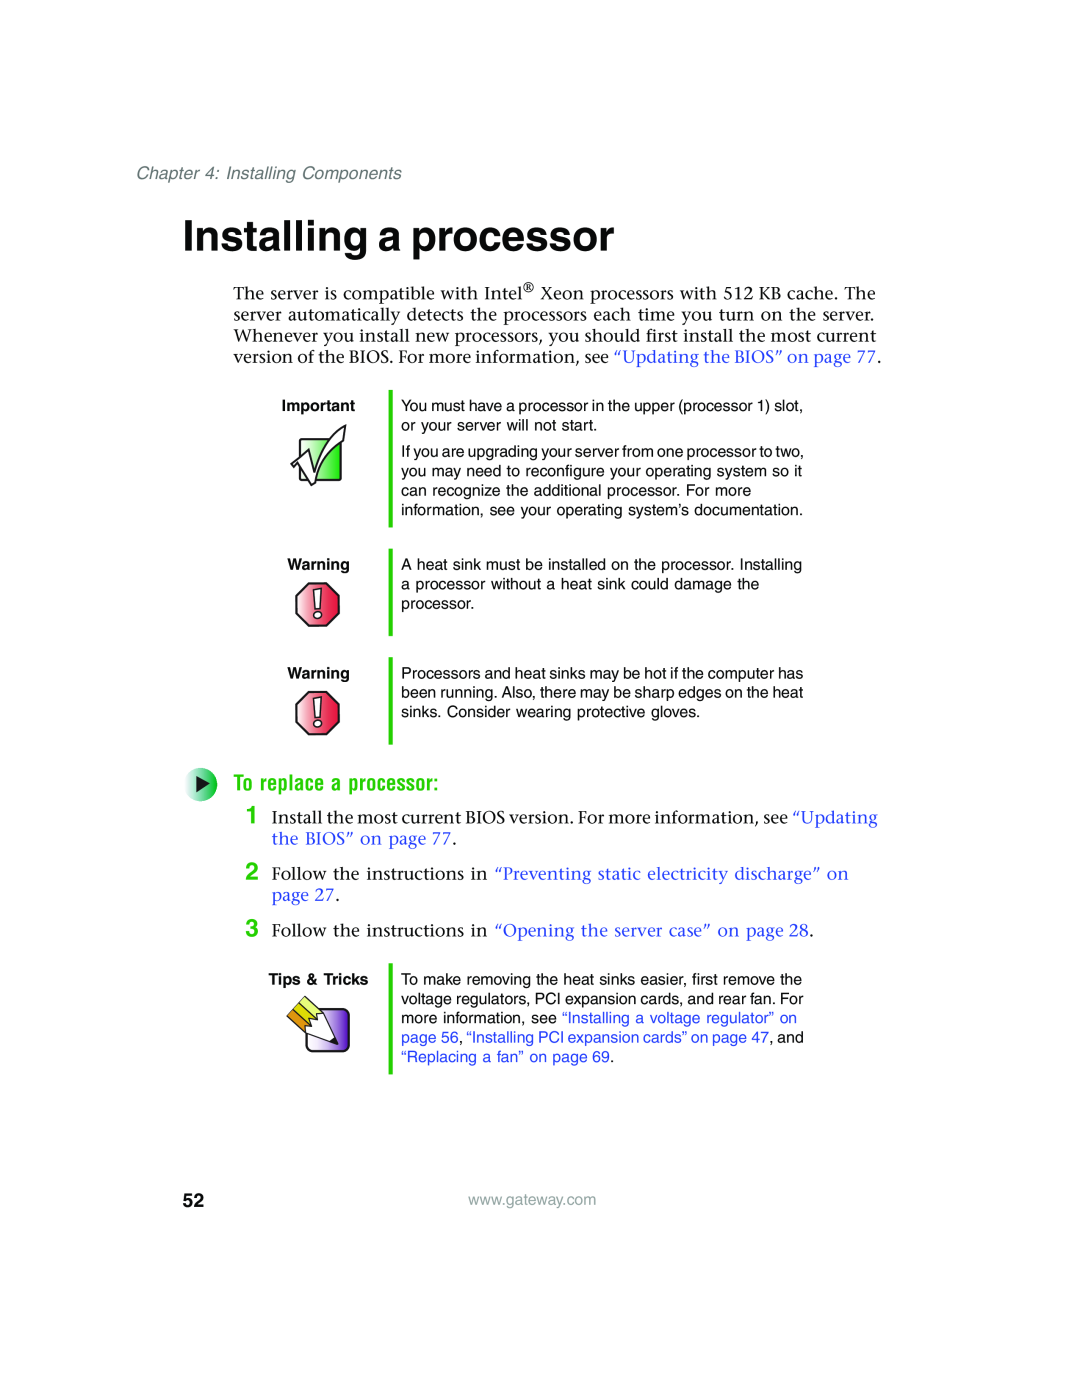 Gateway 980 Installing a processor, To replace a processor, Follow the instructions in “Opening the server case” on page 